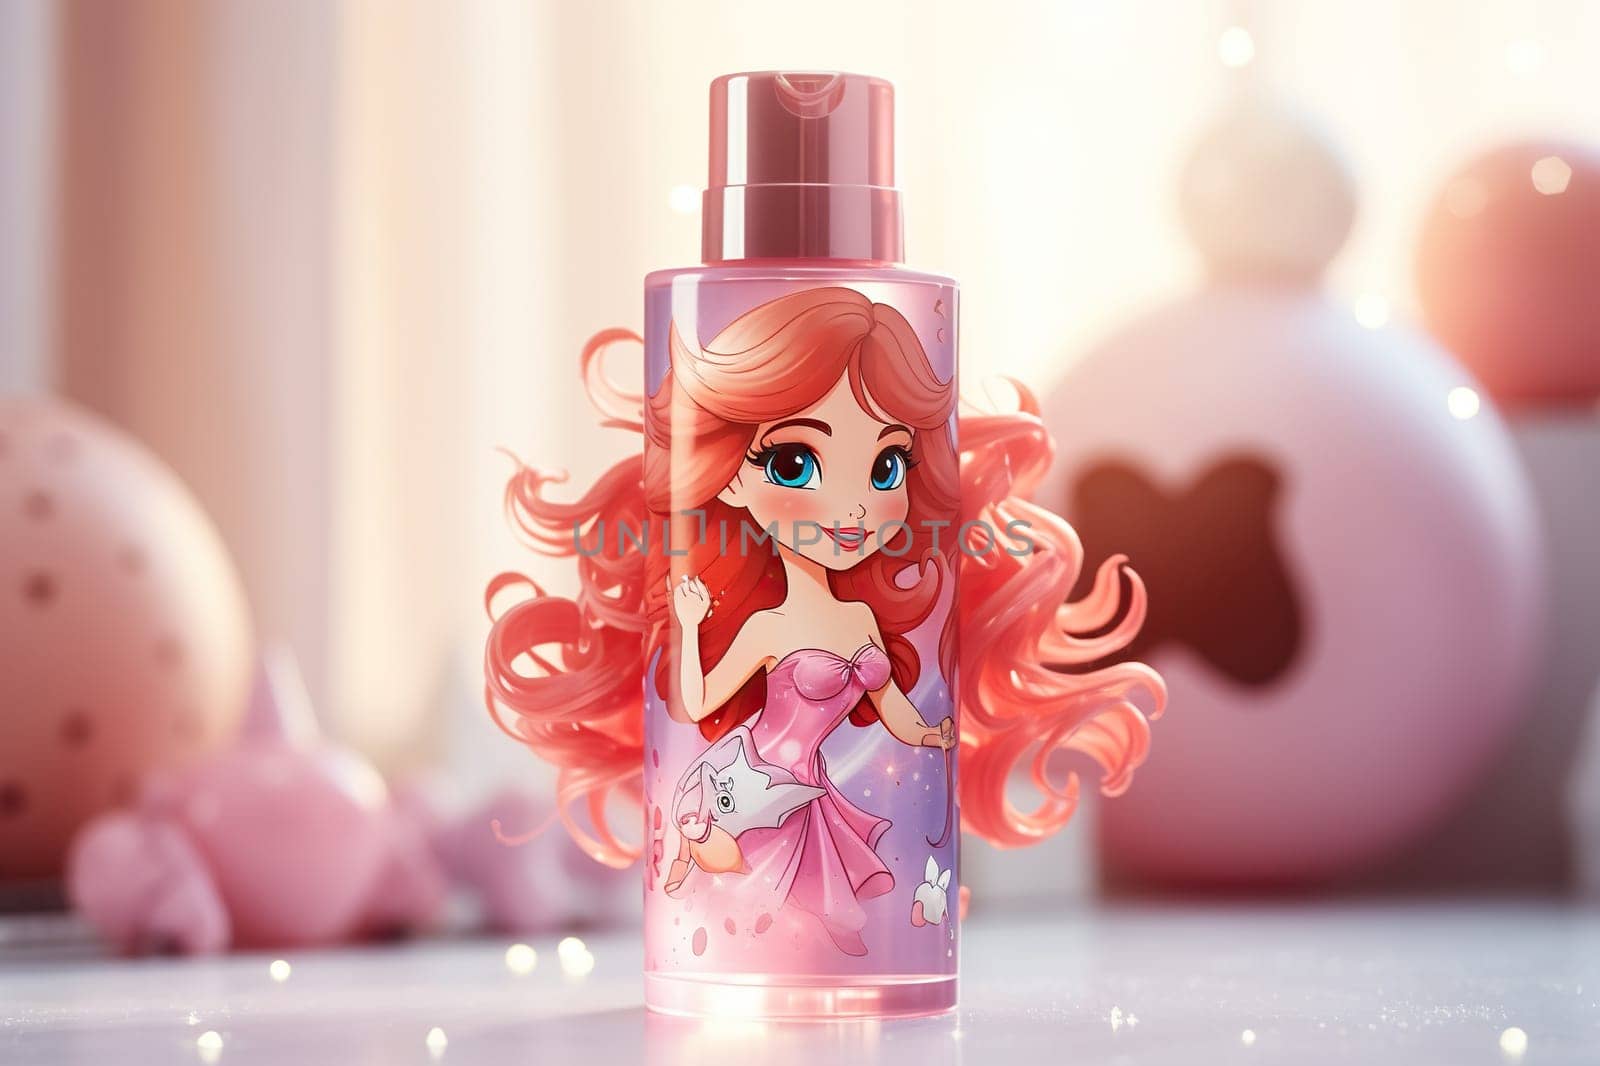 A bottle of perfume for little girls on a blurred background. Children's cosmetics, perfume.